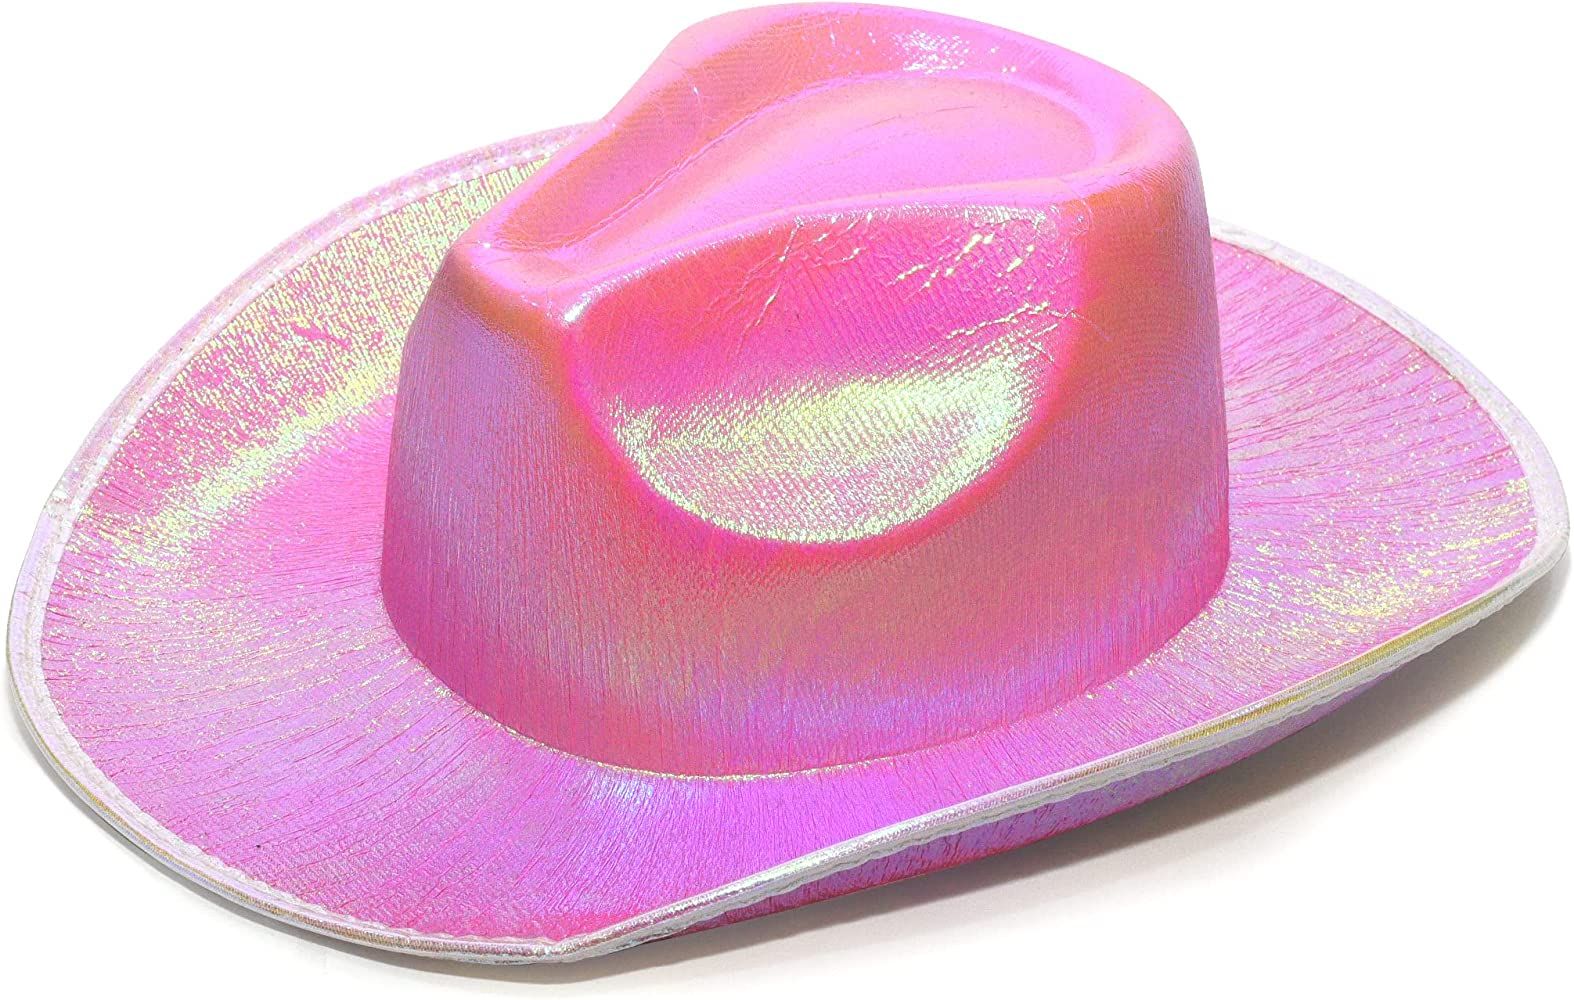 SoJourner Bags Neon Sparkly Glitter Space Cowboy Hat - Fun Metallic Holographic Party Disco Cowgi... | Amazon (US)